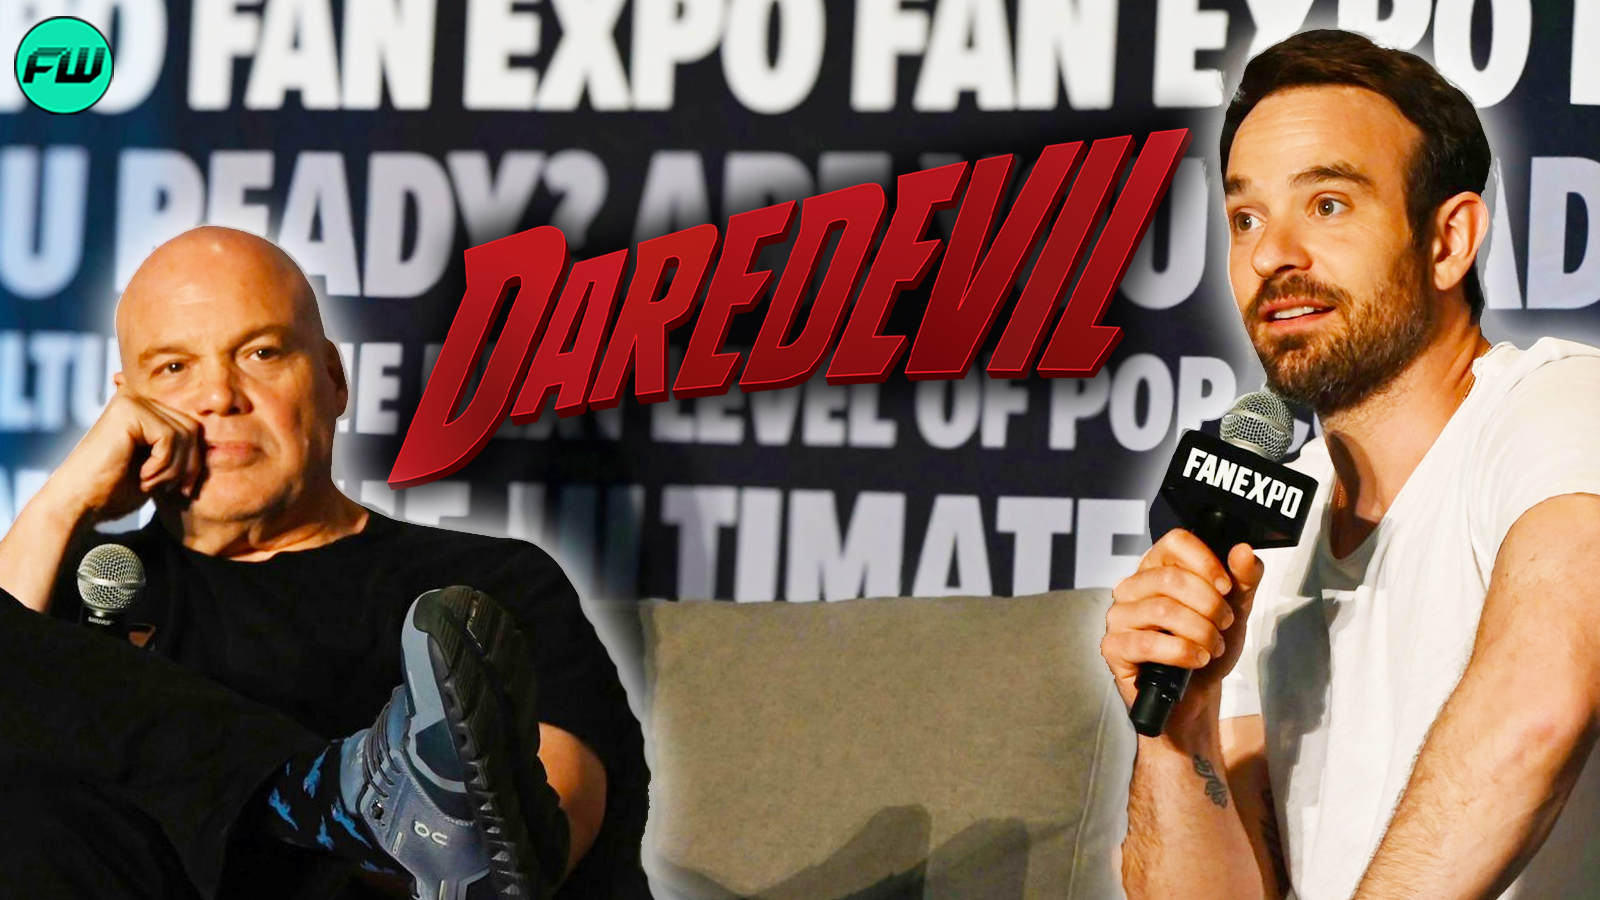 WATCH: Full Daredevil Panel at Fan Expo Philadelphia 2023 with Charlie Cox & Vincent D'Onofrio (VIDEO)